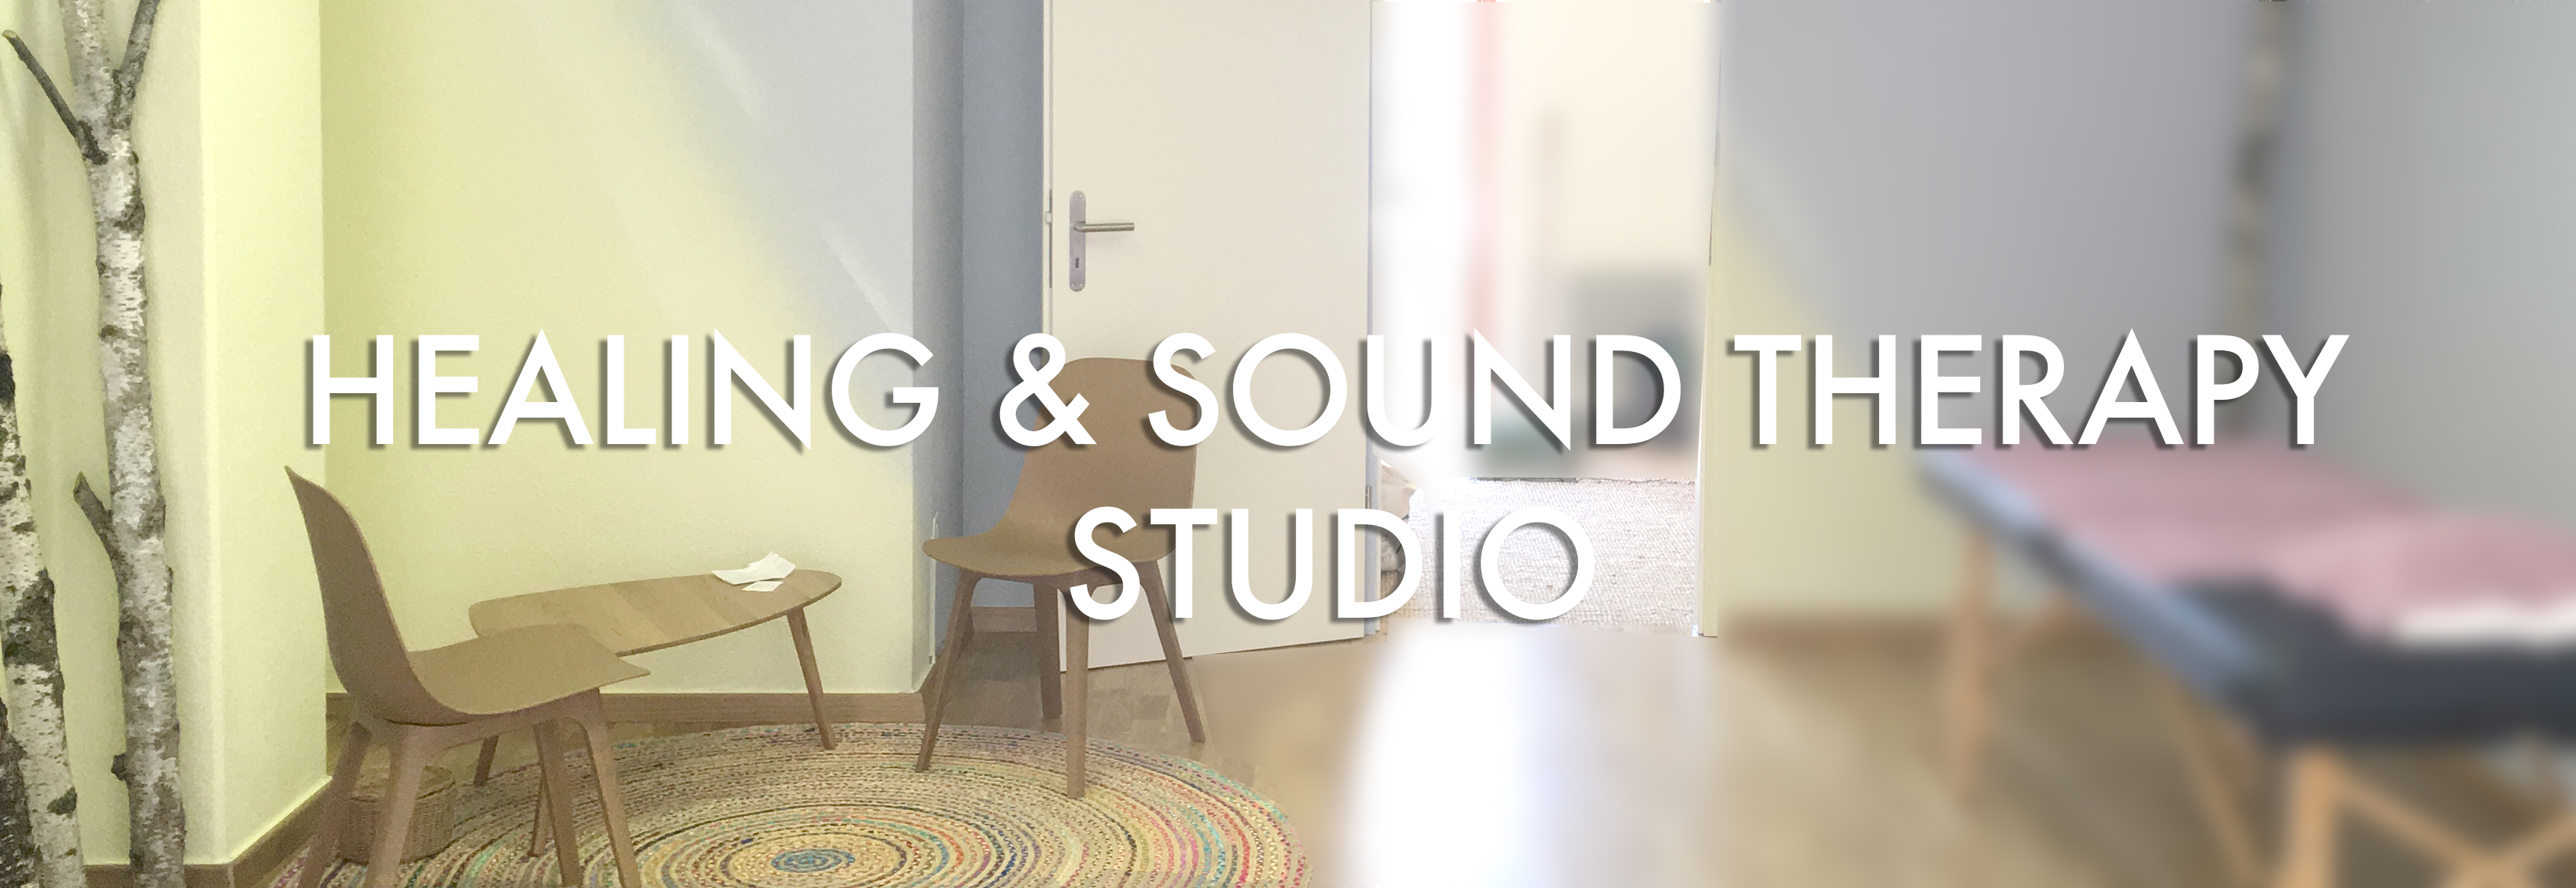 Healing and Sound Therapy Studio 